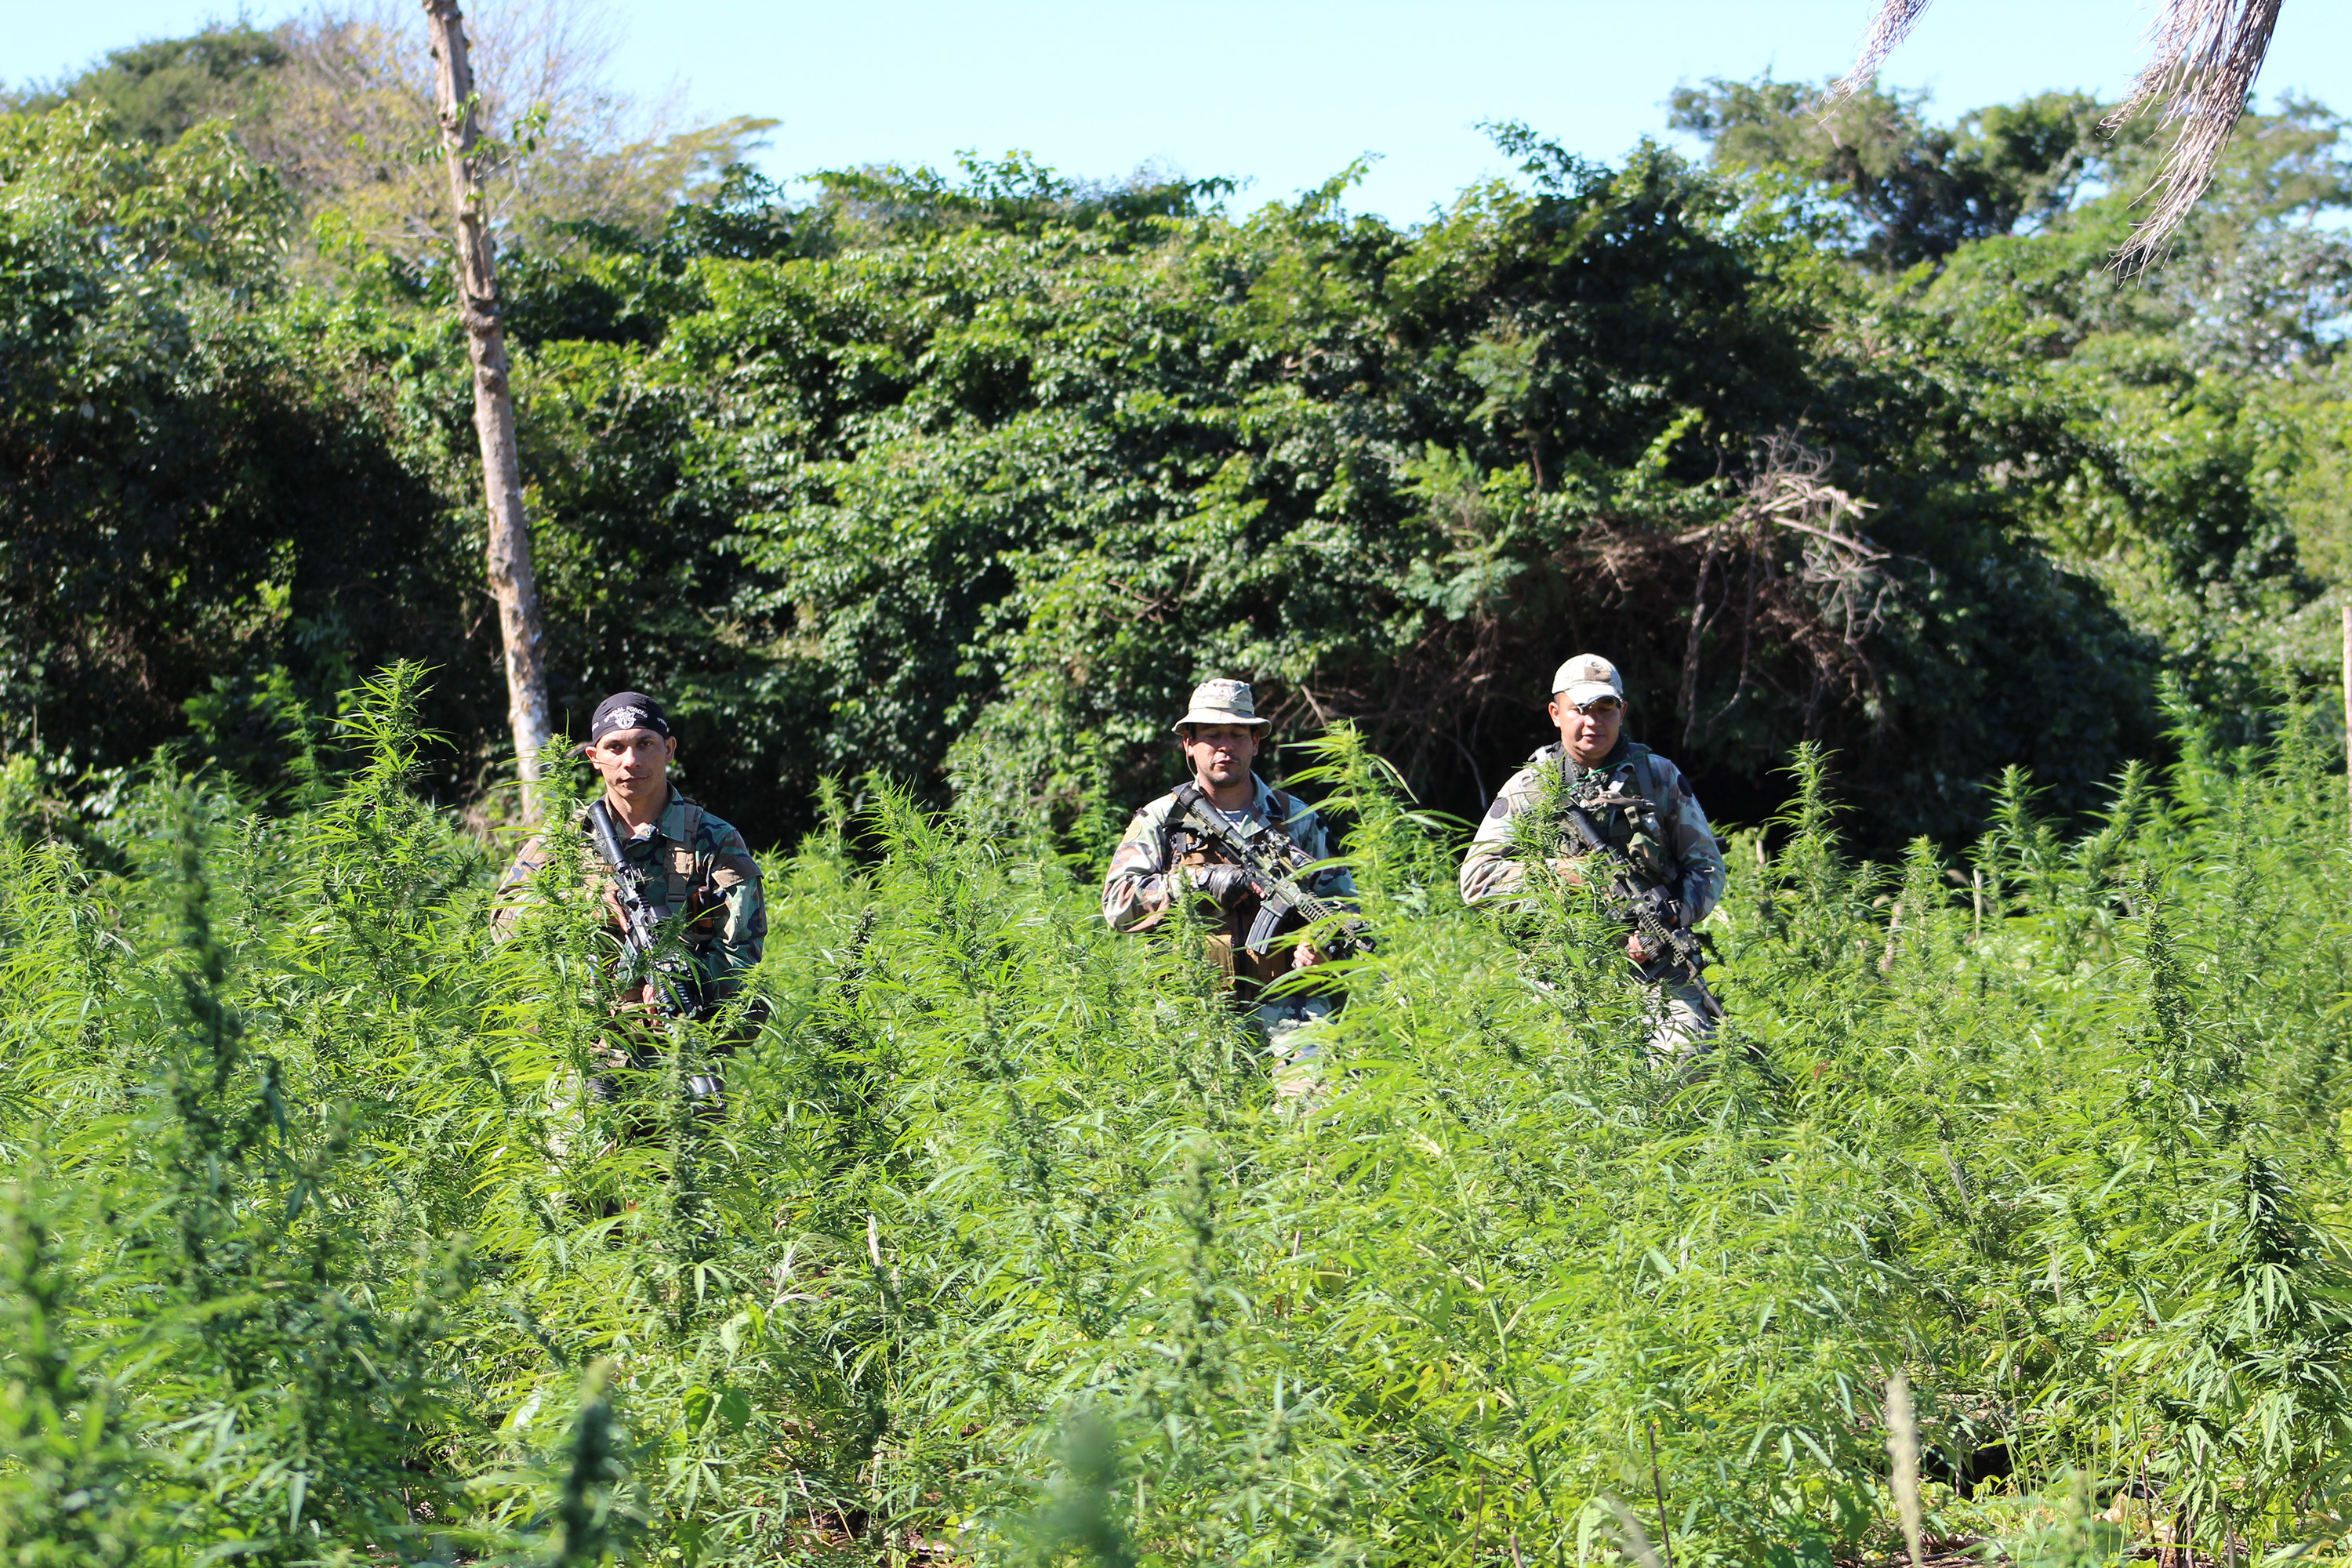 Paraguay's "War on Weed" Pulitzer Center